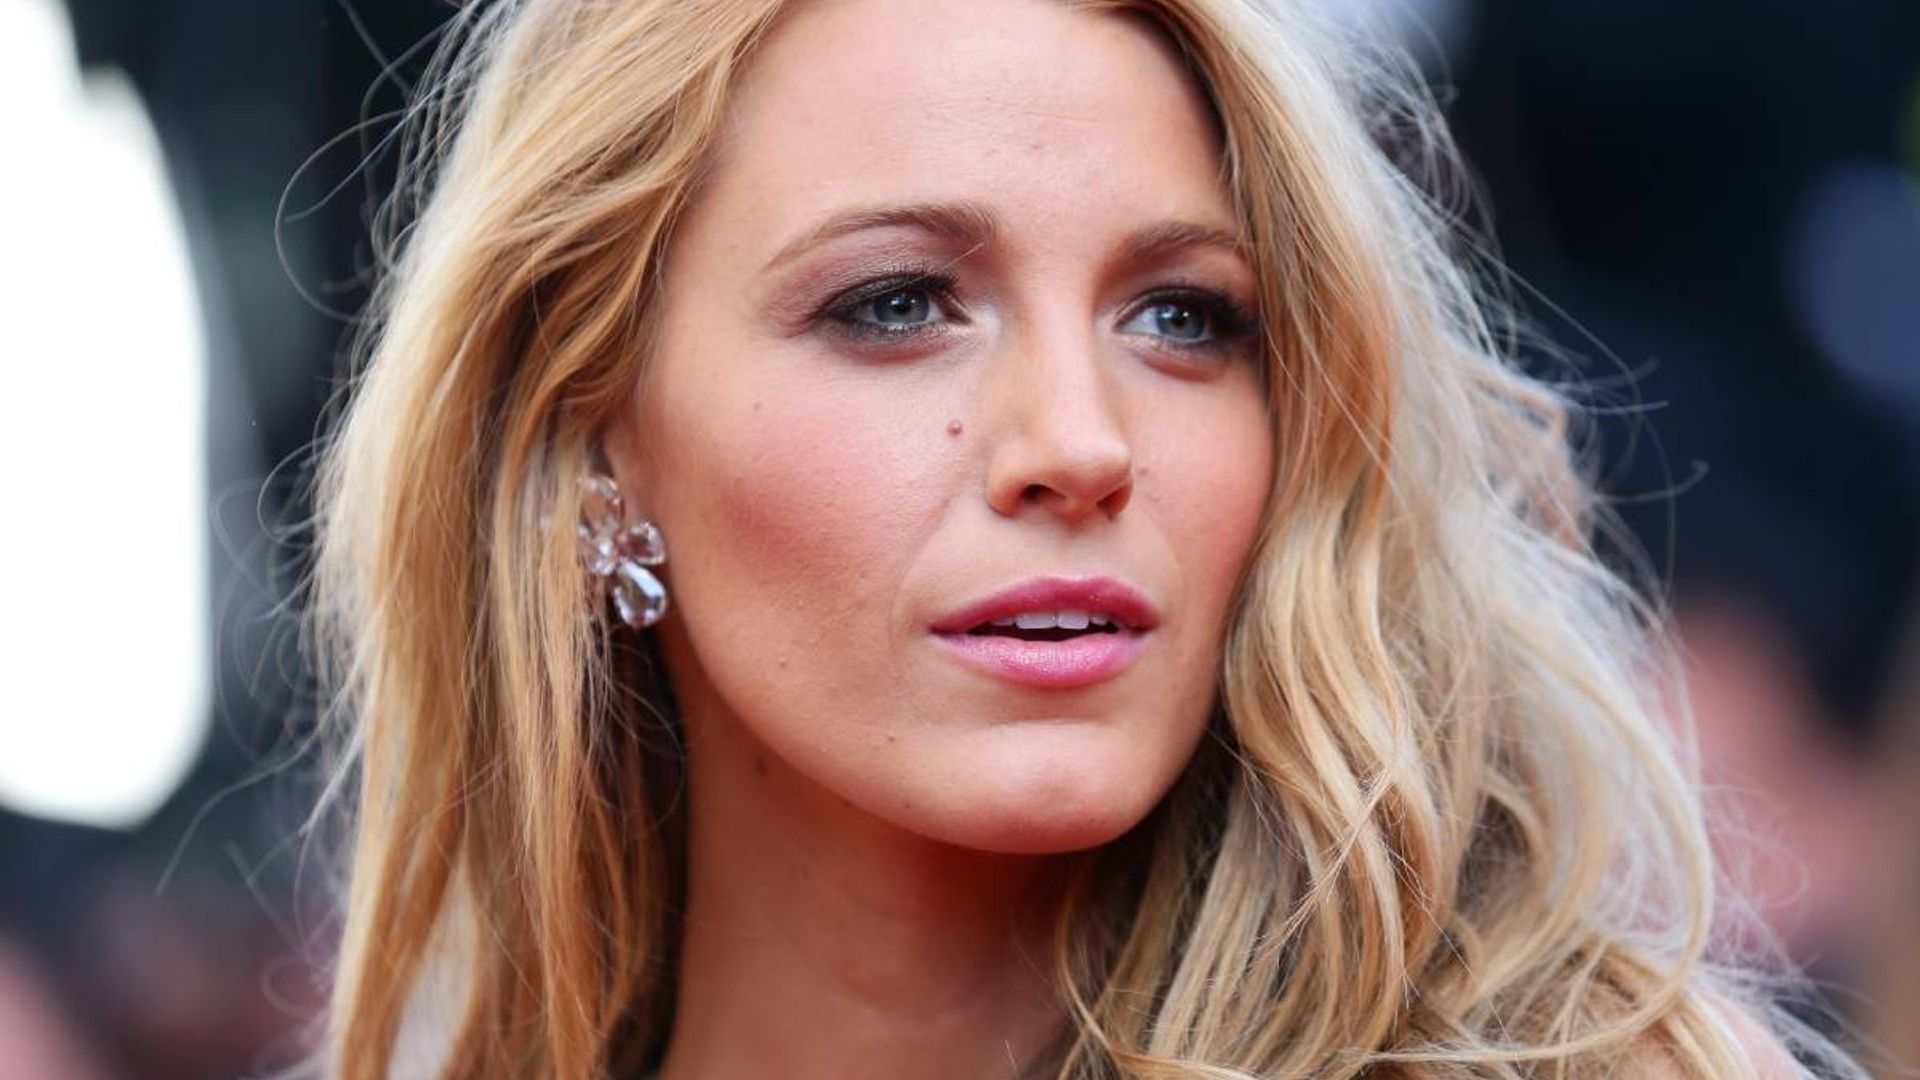 Blake Lively Shows Off Her & Ryan Reynolds' Bedroom: Photos